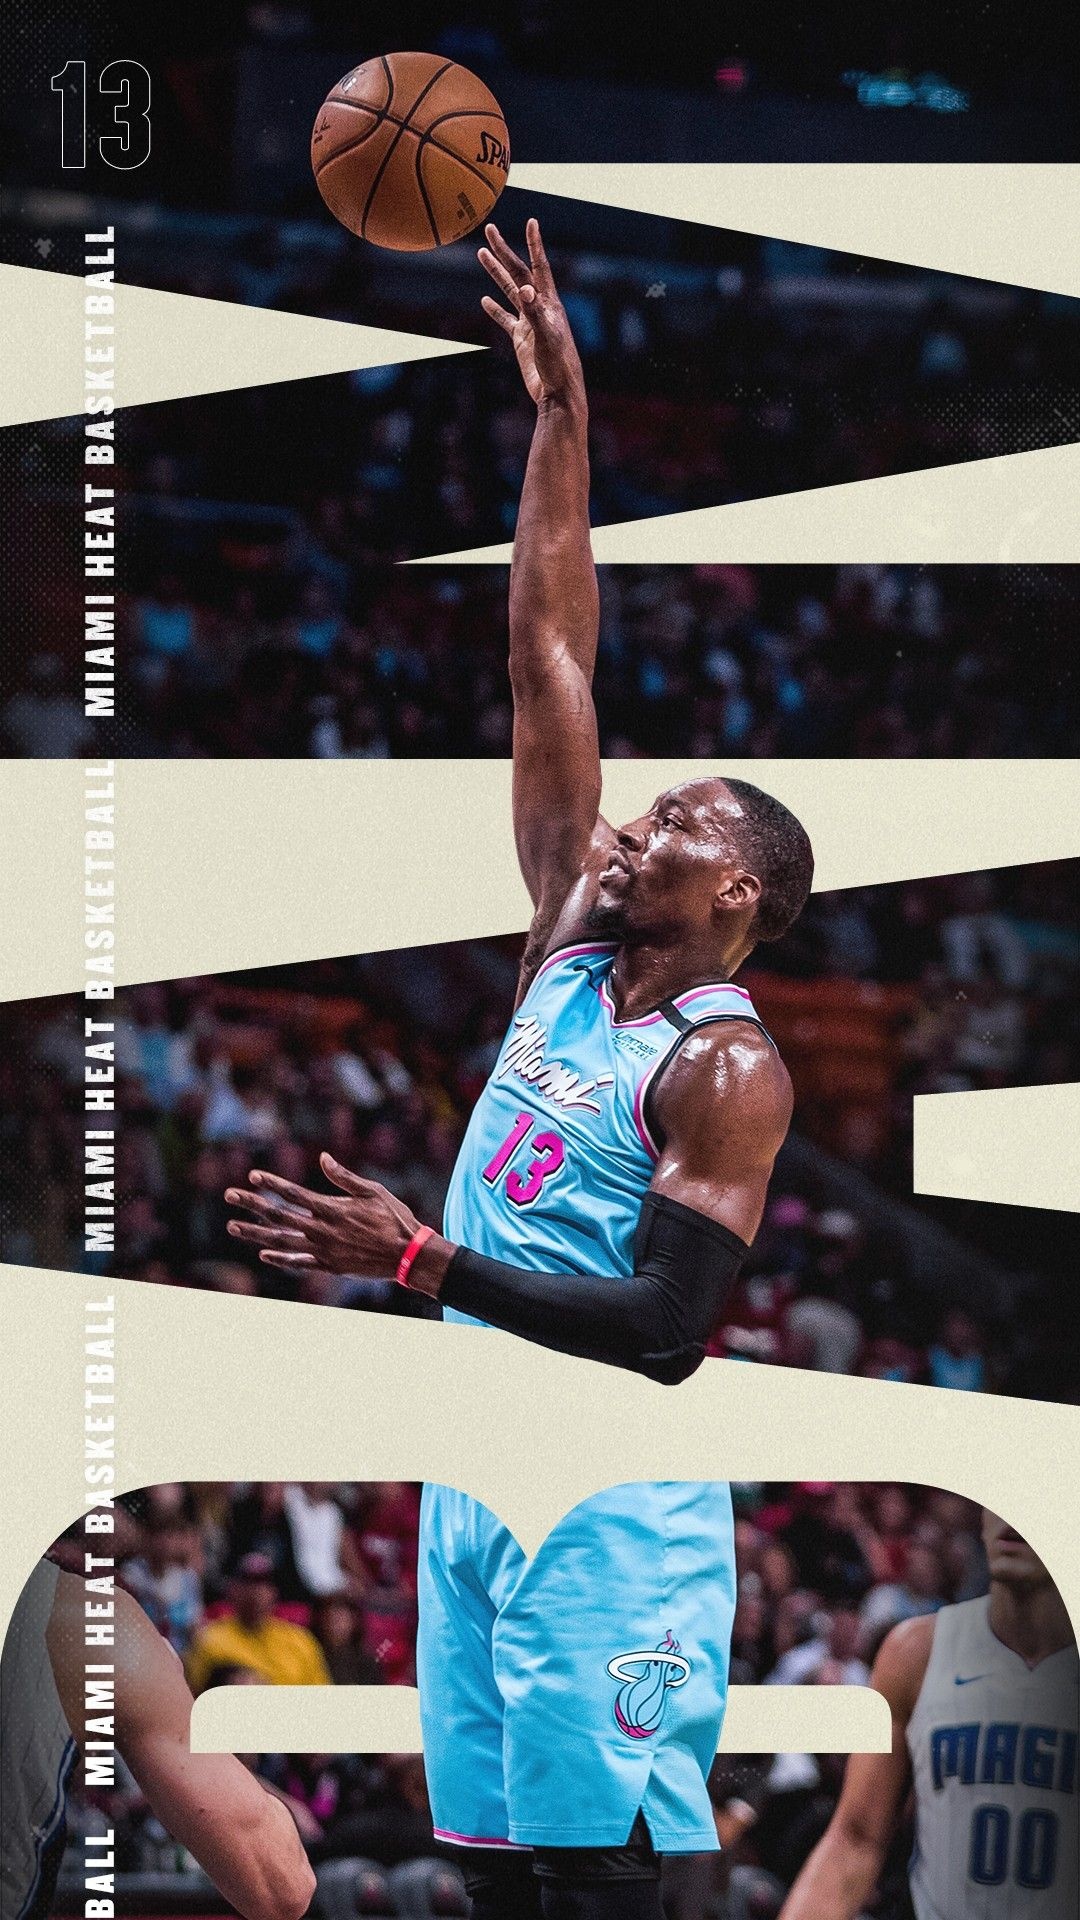 Miami Heat: Bam Adebayo, The team earned the second seed in the East for the 2012 NBA playoffs. 1080x1920 Full HD Wallpaper.